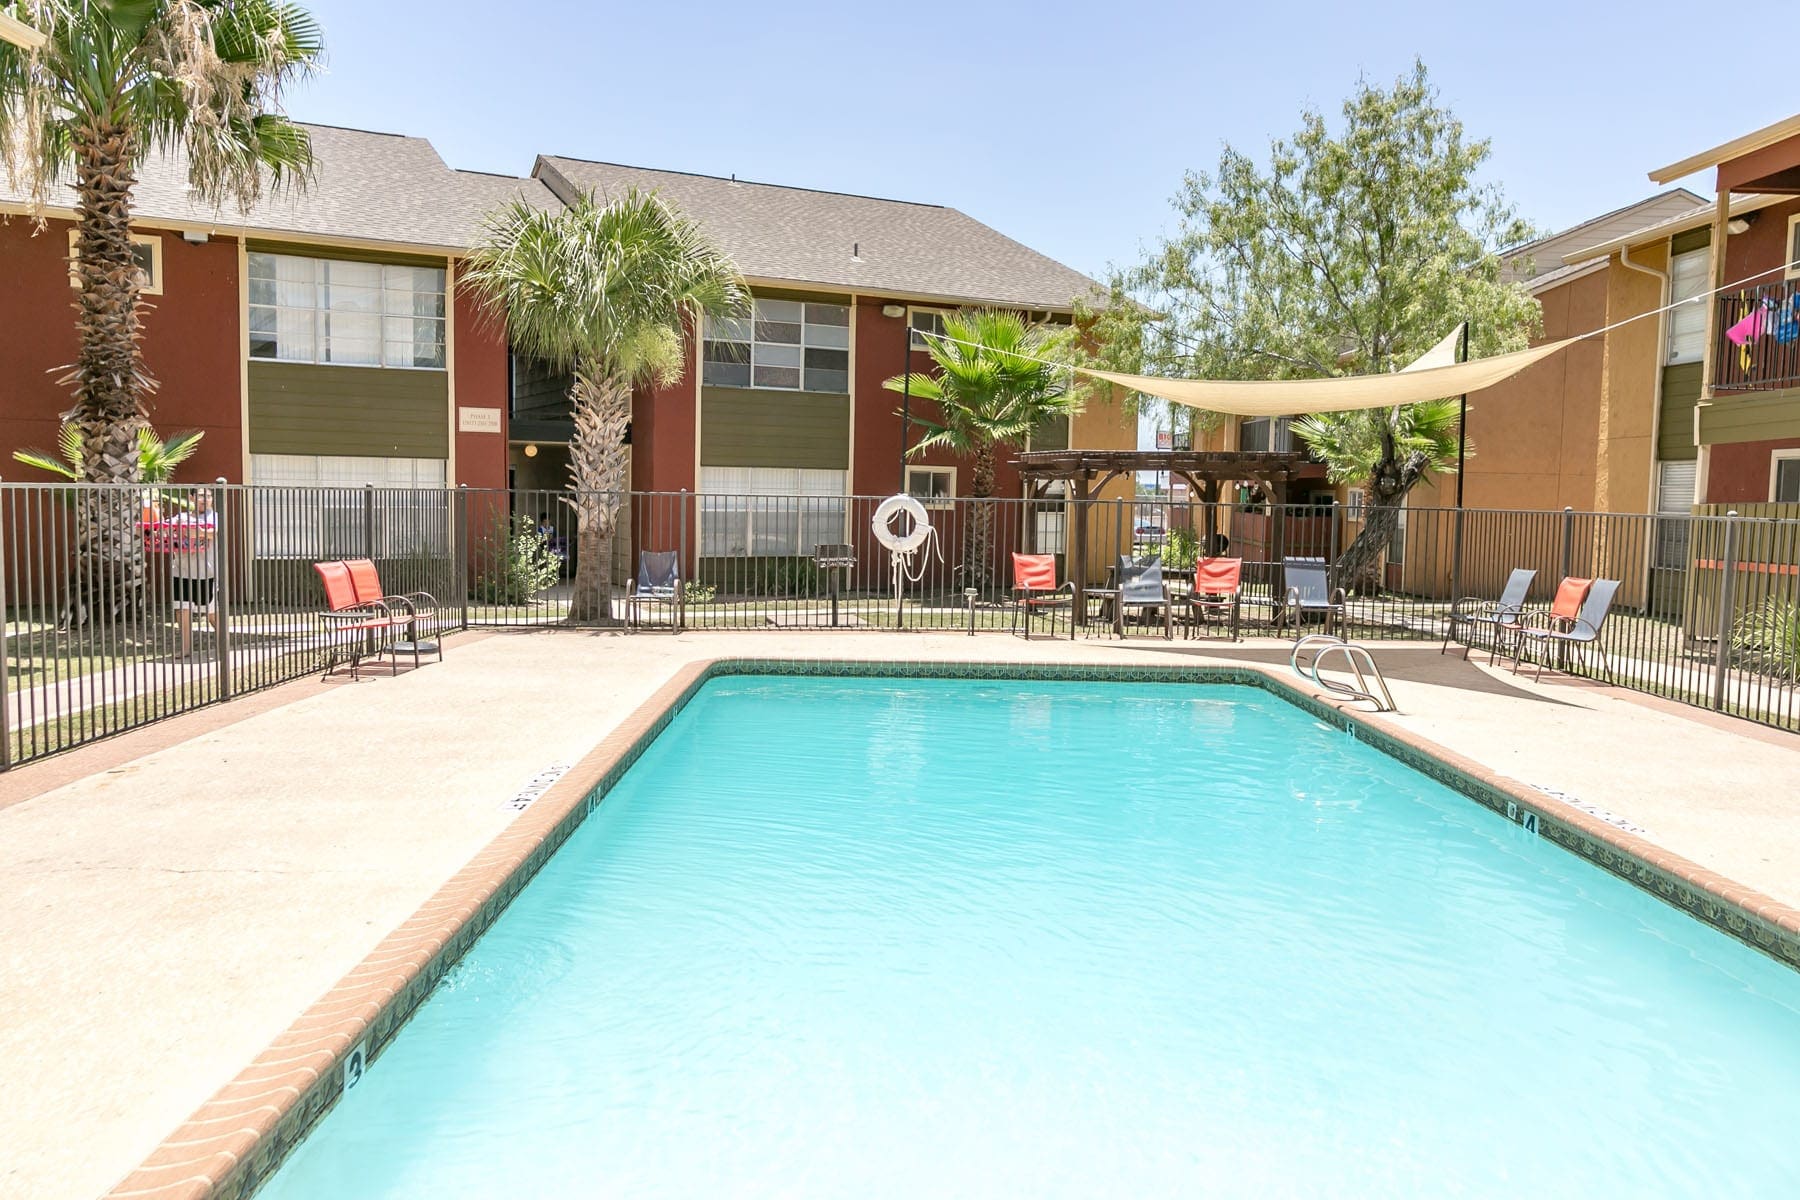 Apartments for Rent San Antonio - City-Base Vista - Outdoor Swimming Pool With Cool Water, Chairs, and a Covering in the Corner for Shade